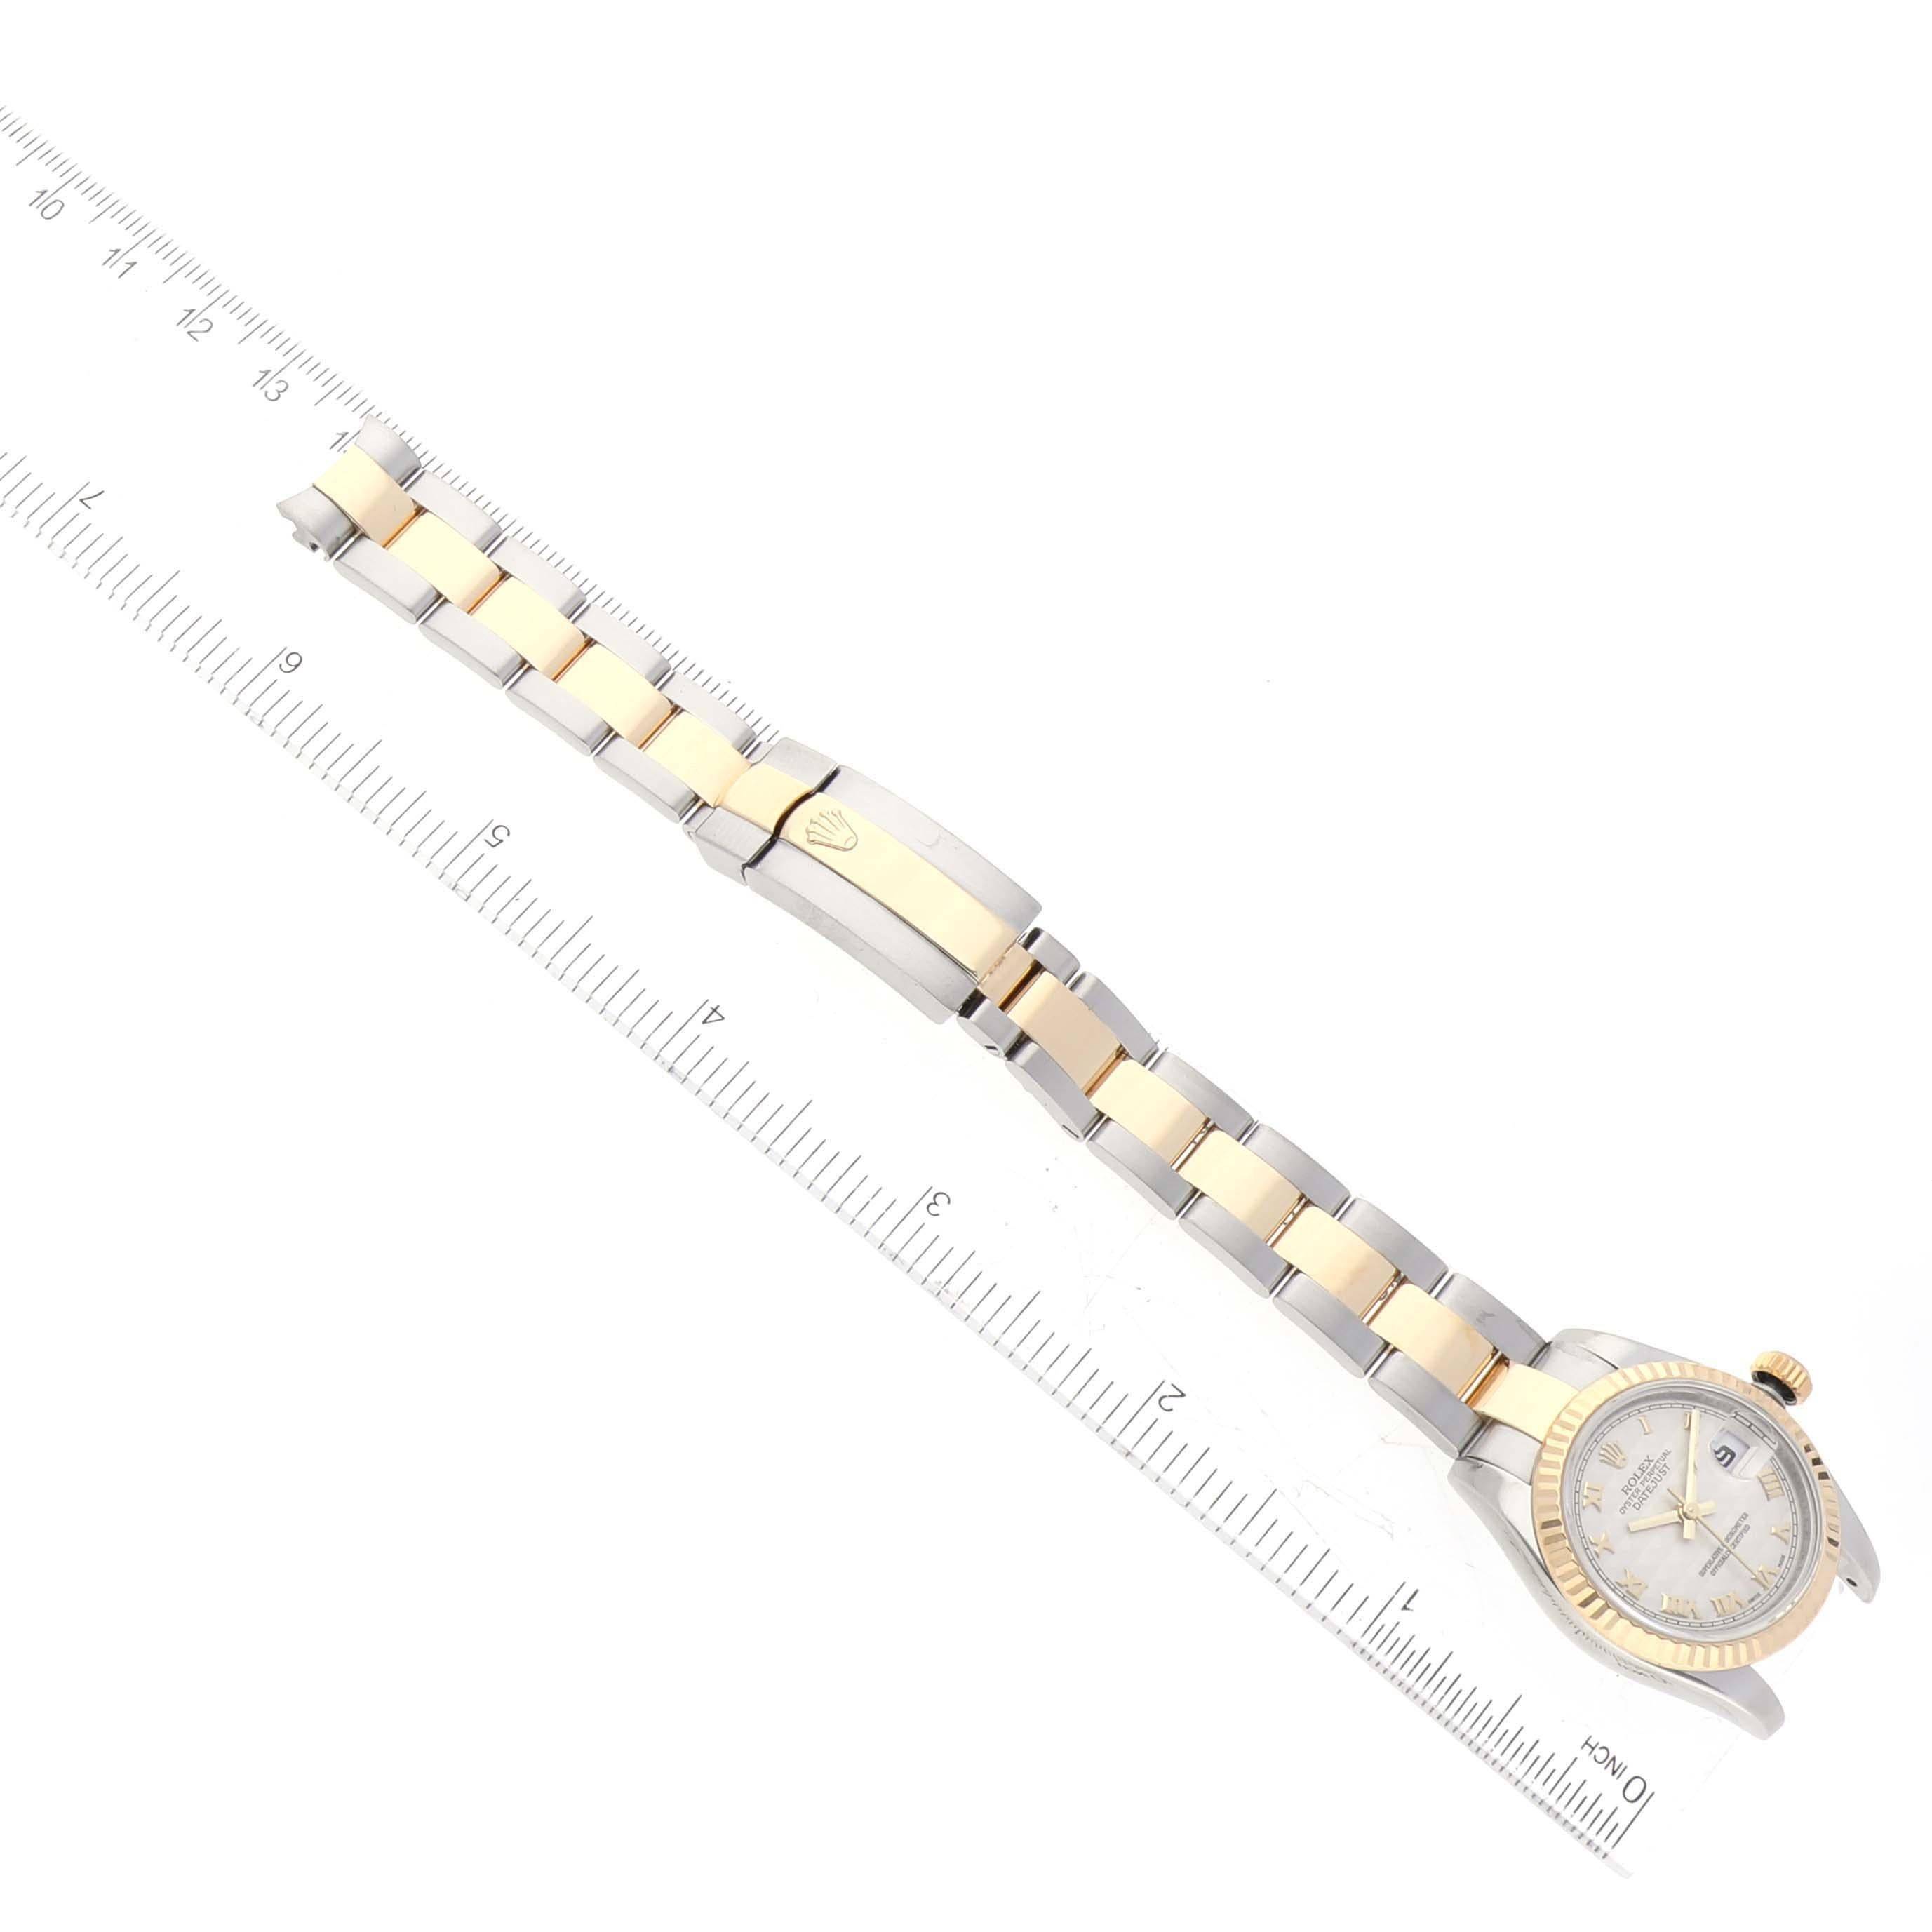 Rolex Datejust Steel Yellow Gold Ivory Pyramid Dial Ladies Watch 179173 For Sale 5